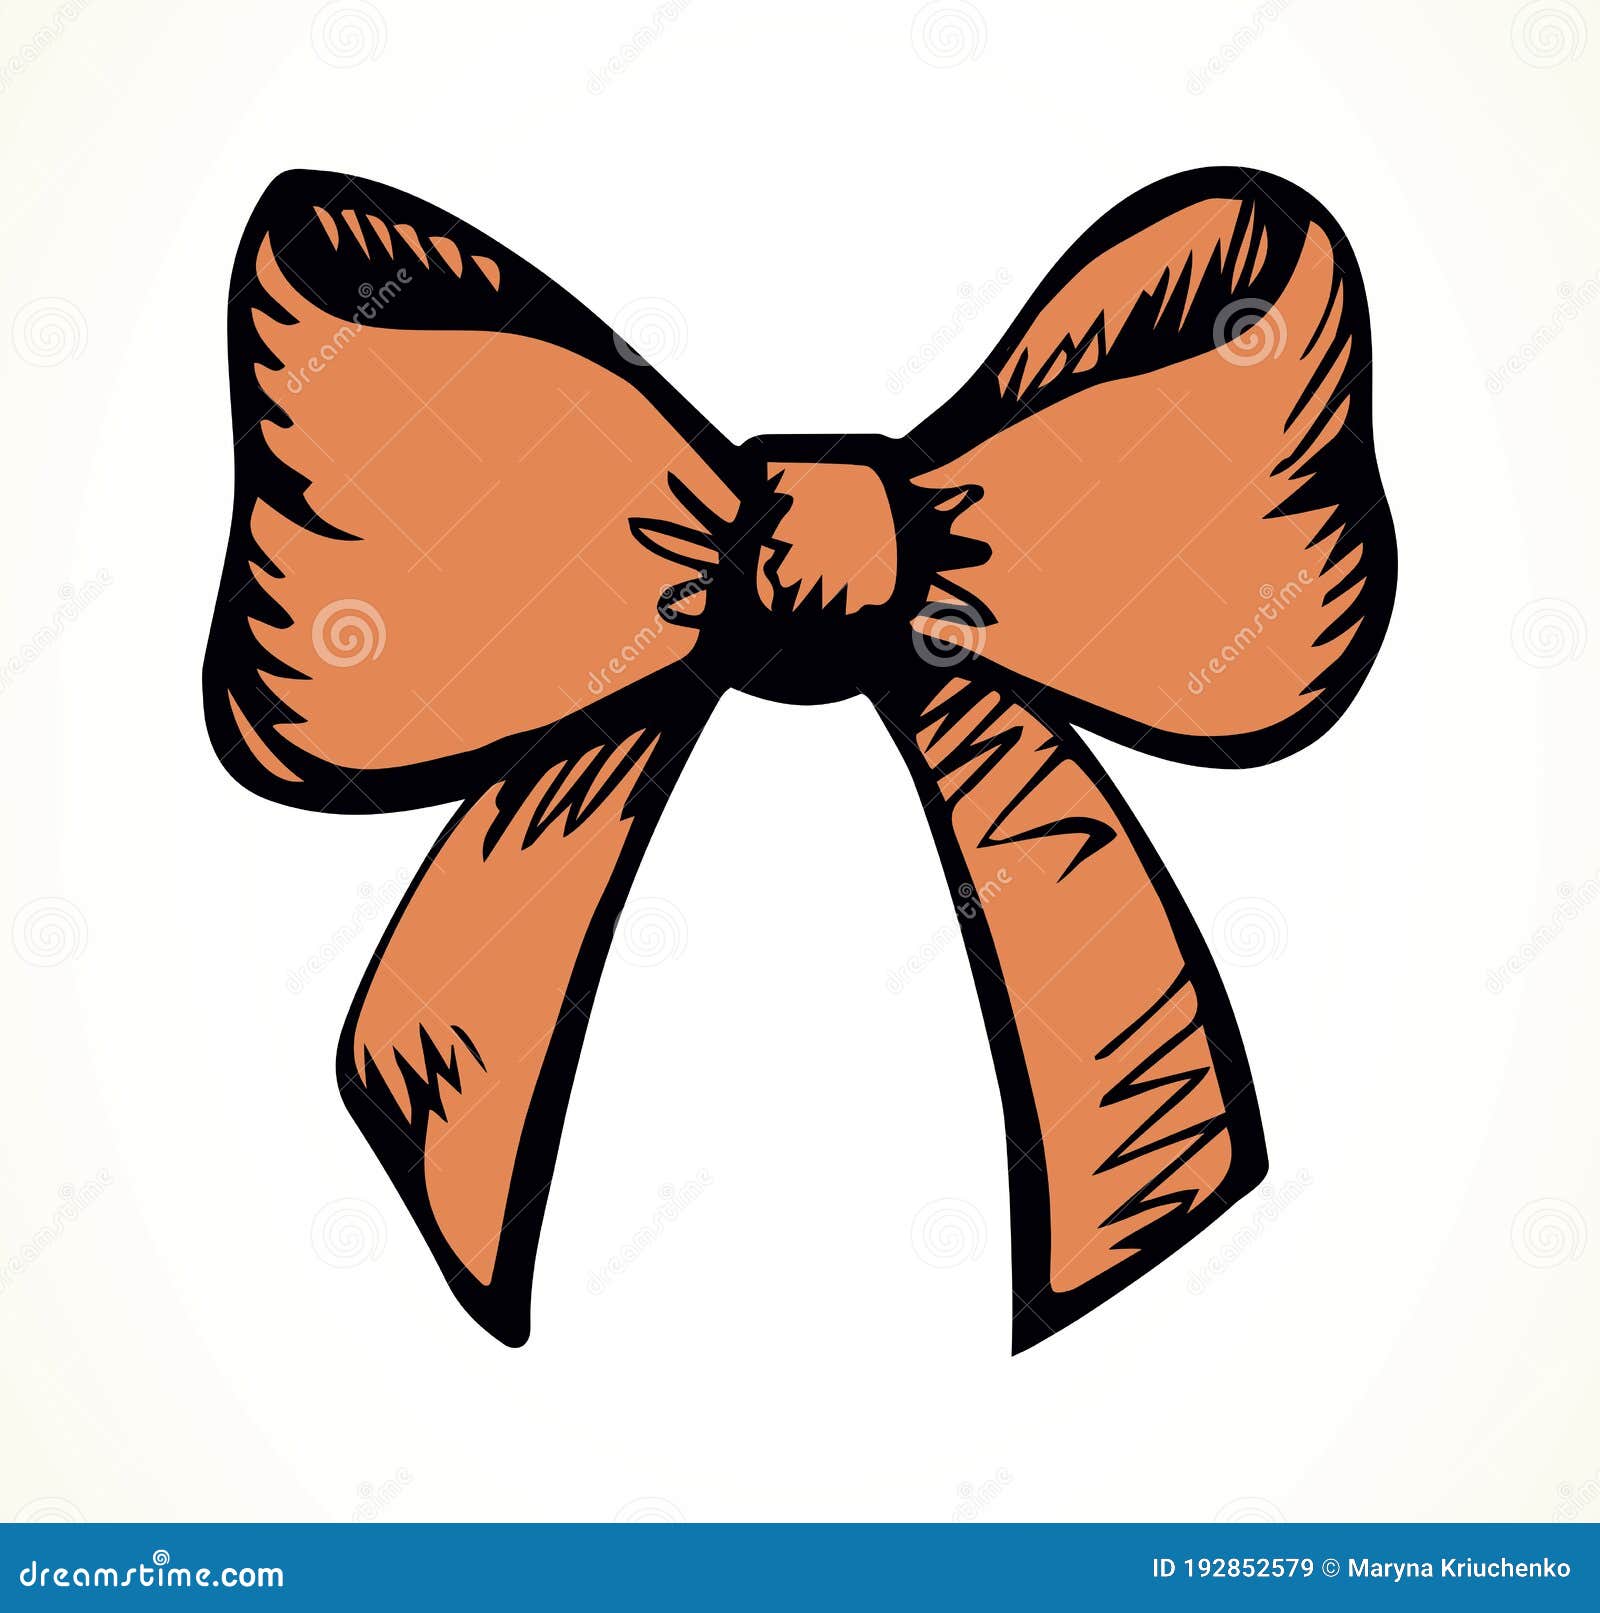 Simple and cute ribbon, vector material - Stock Illustration